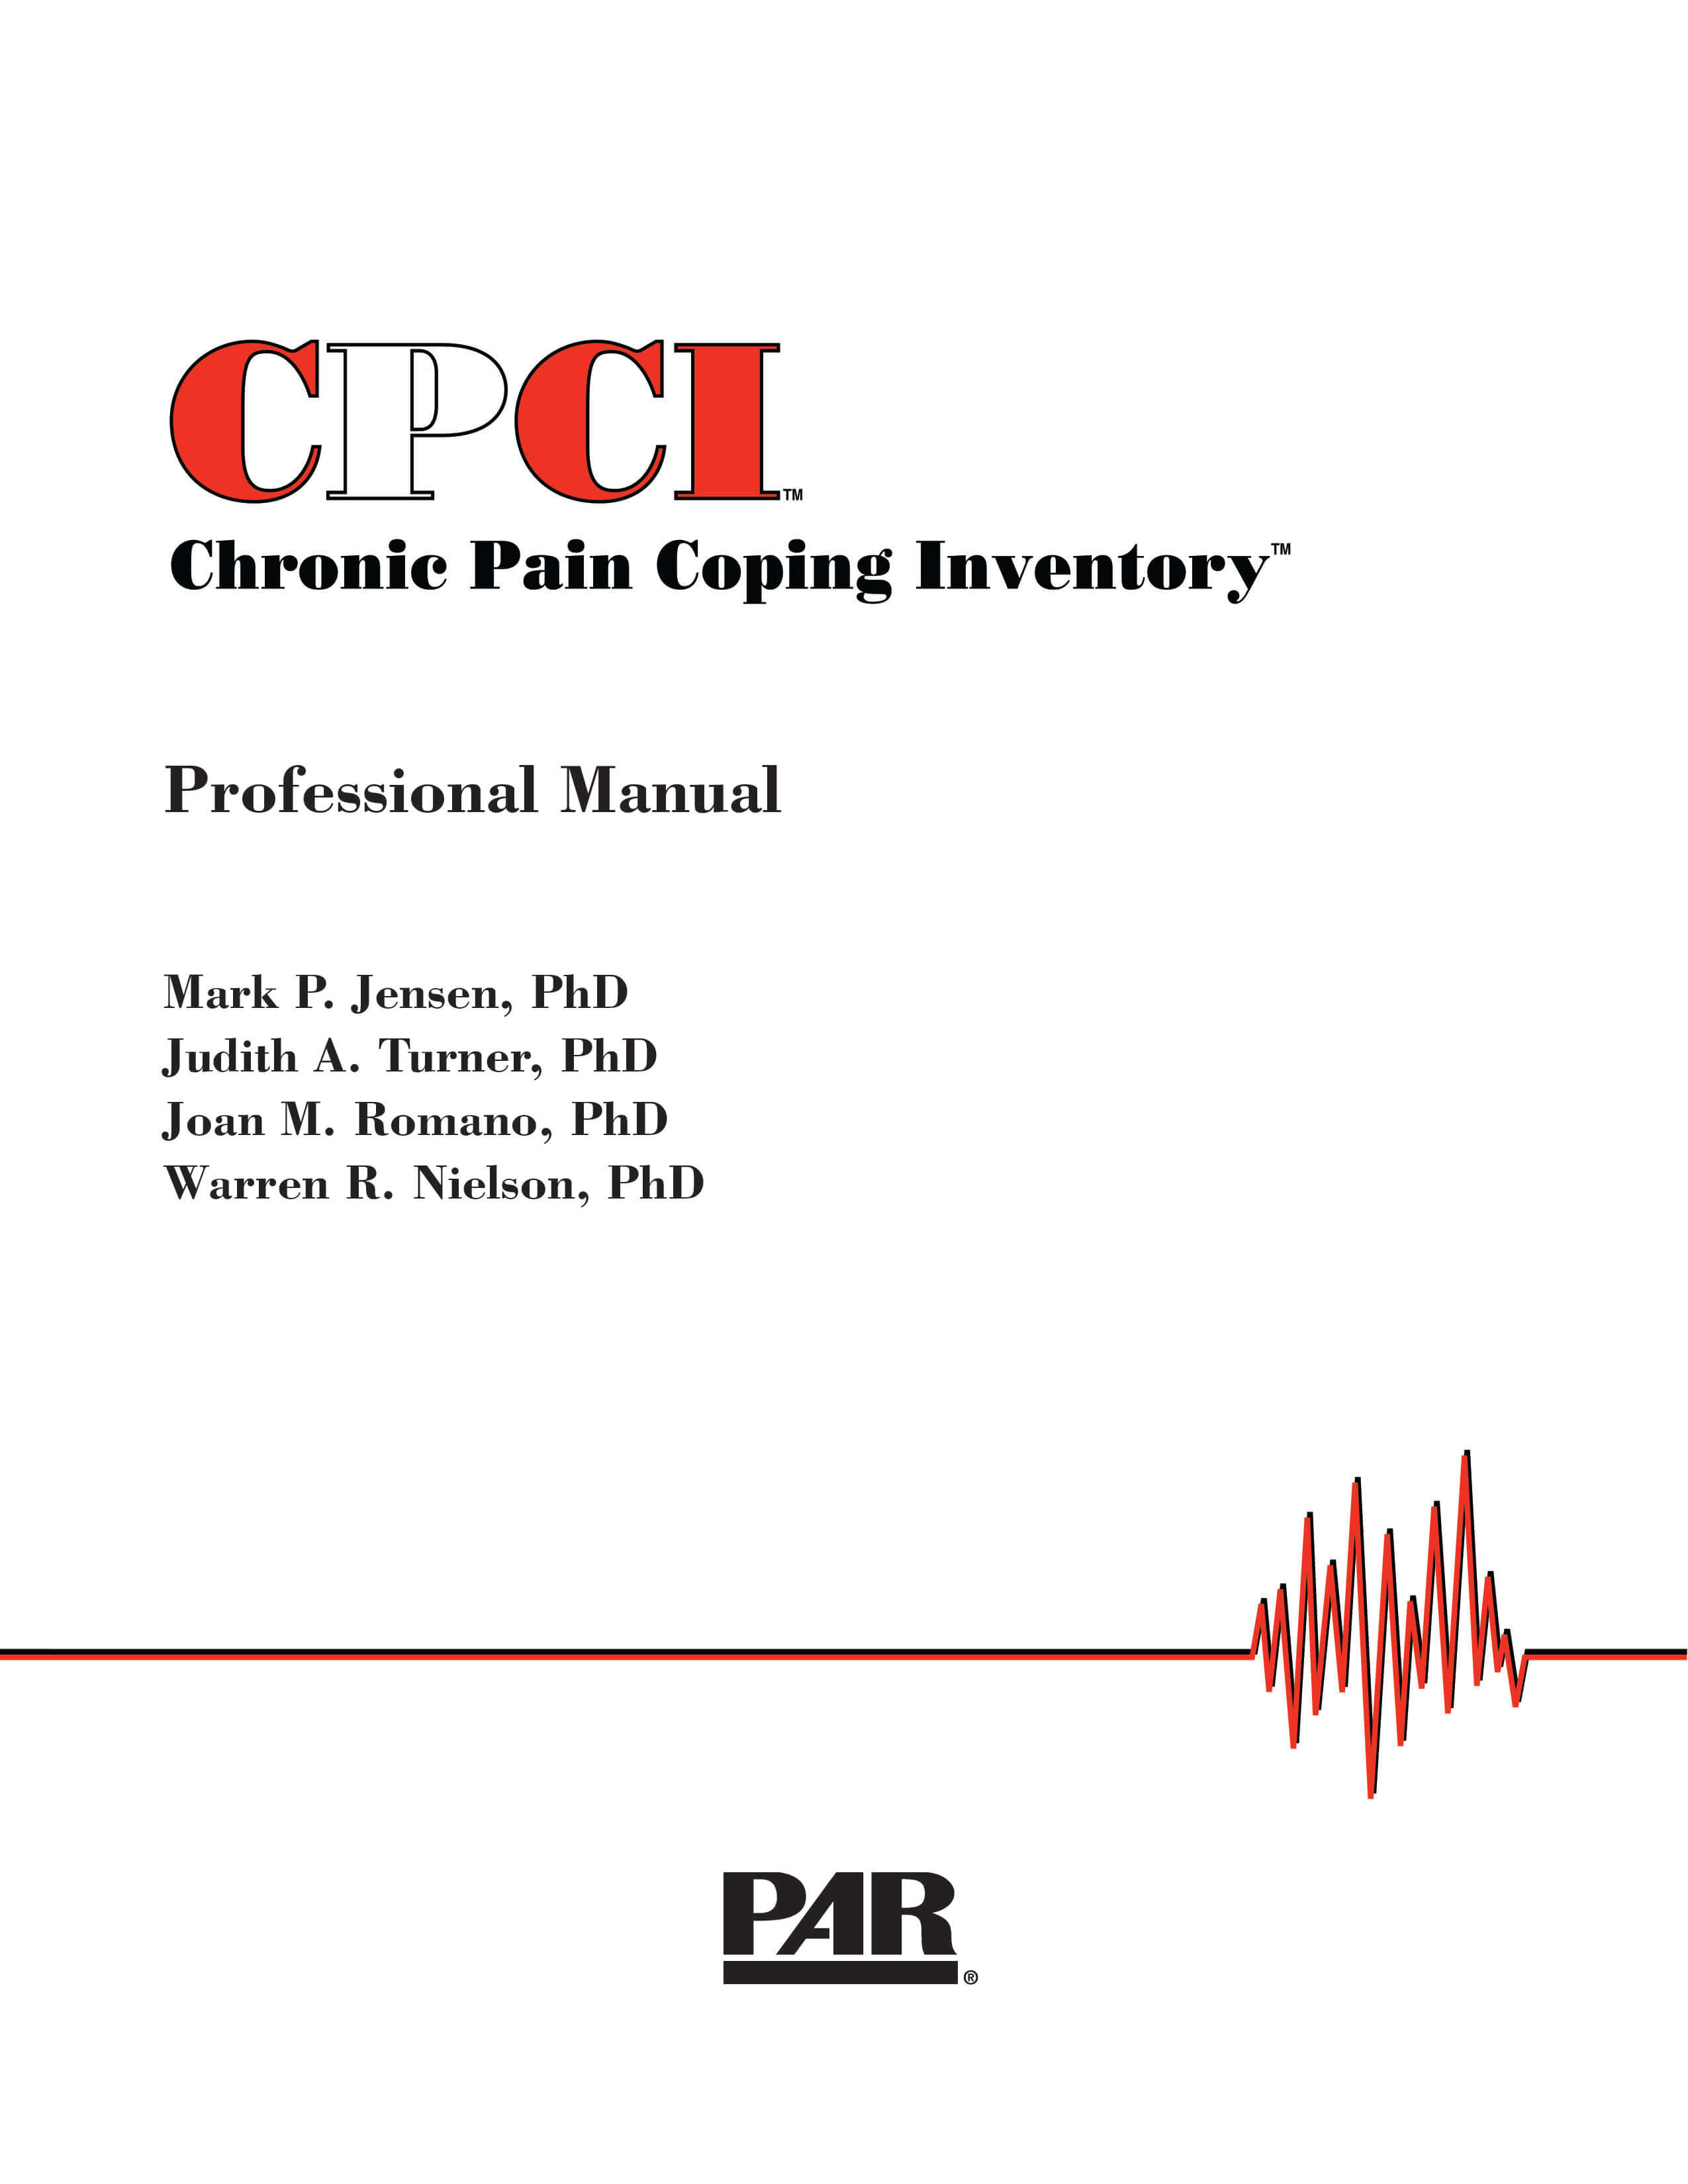 Chronic Pain Coping Inventory™ - 